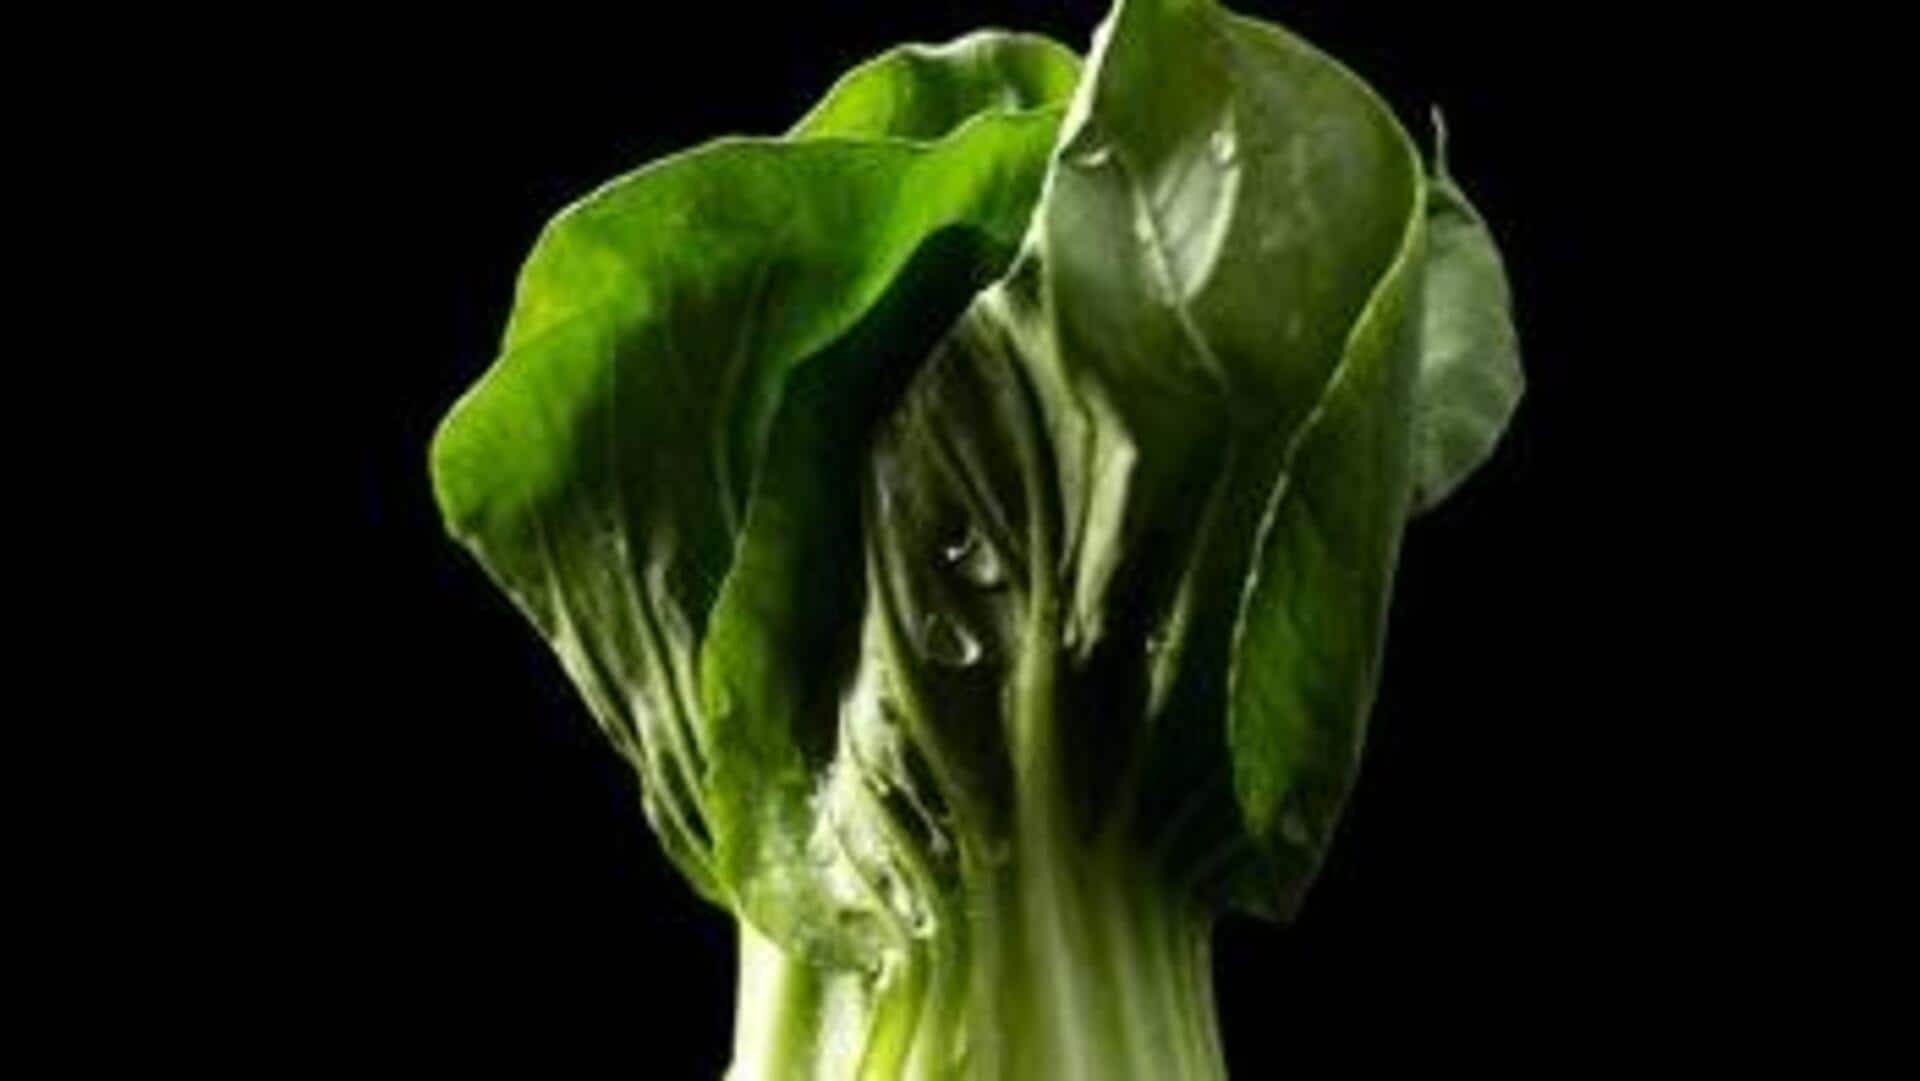 Pechay: Know this green vegetable's incredible health benefits